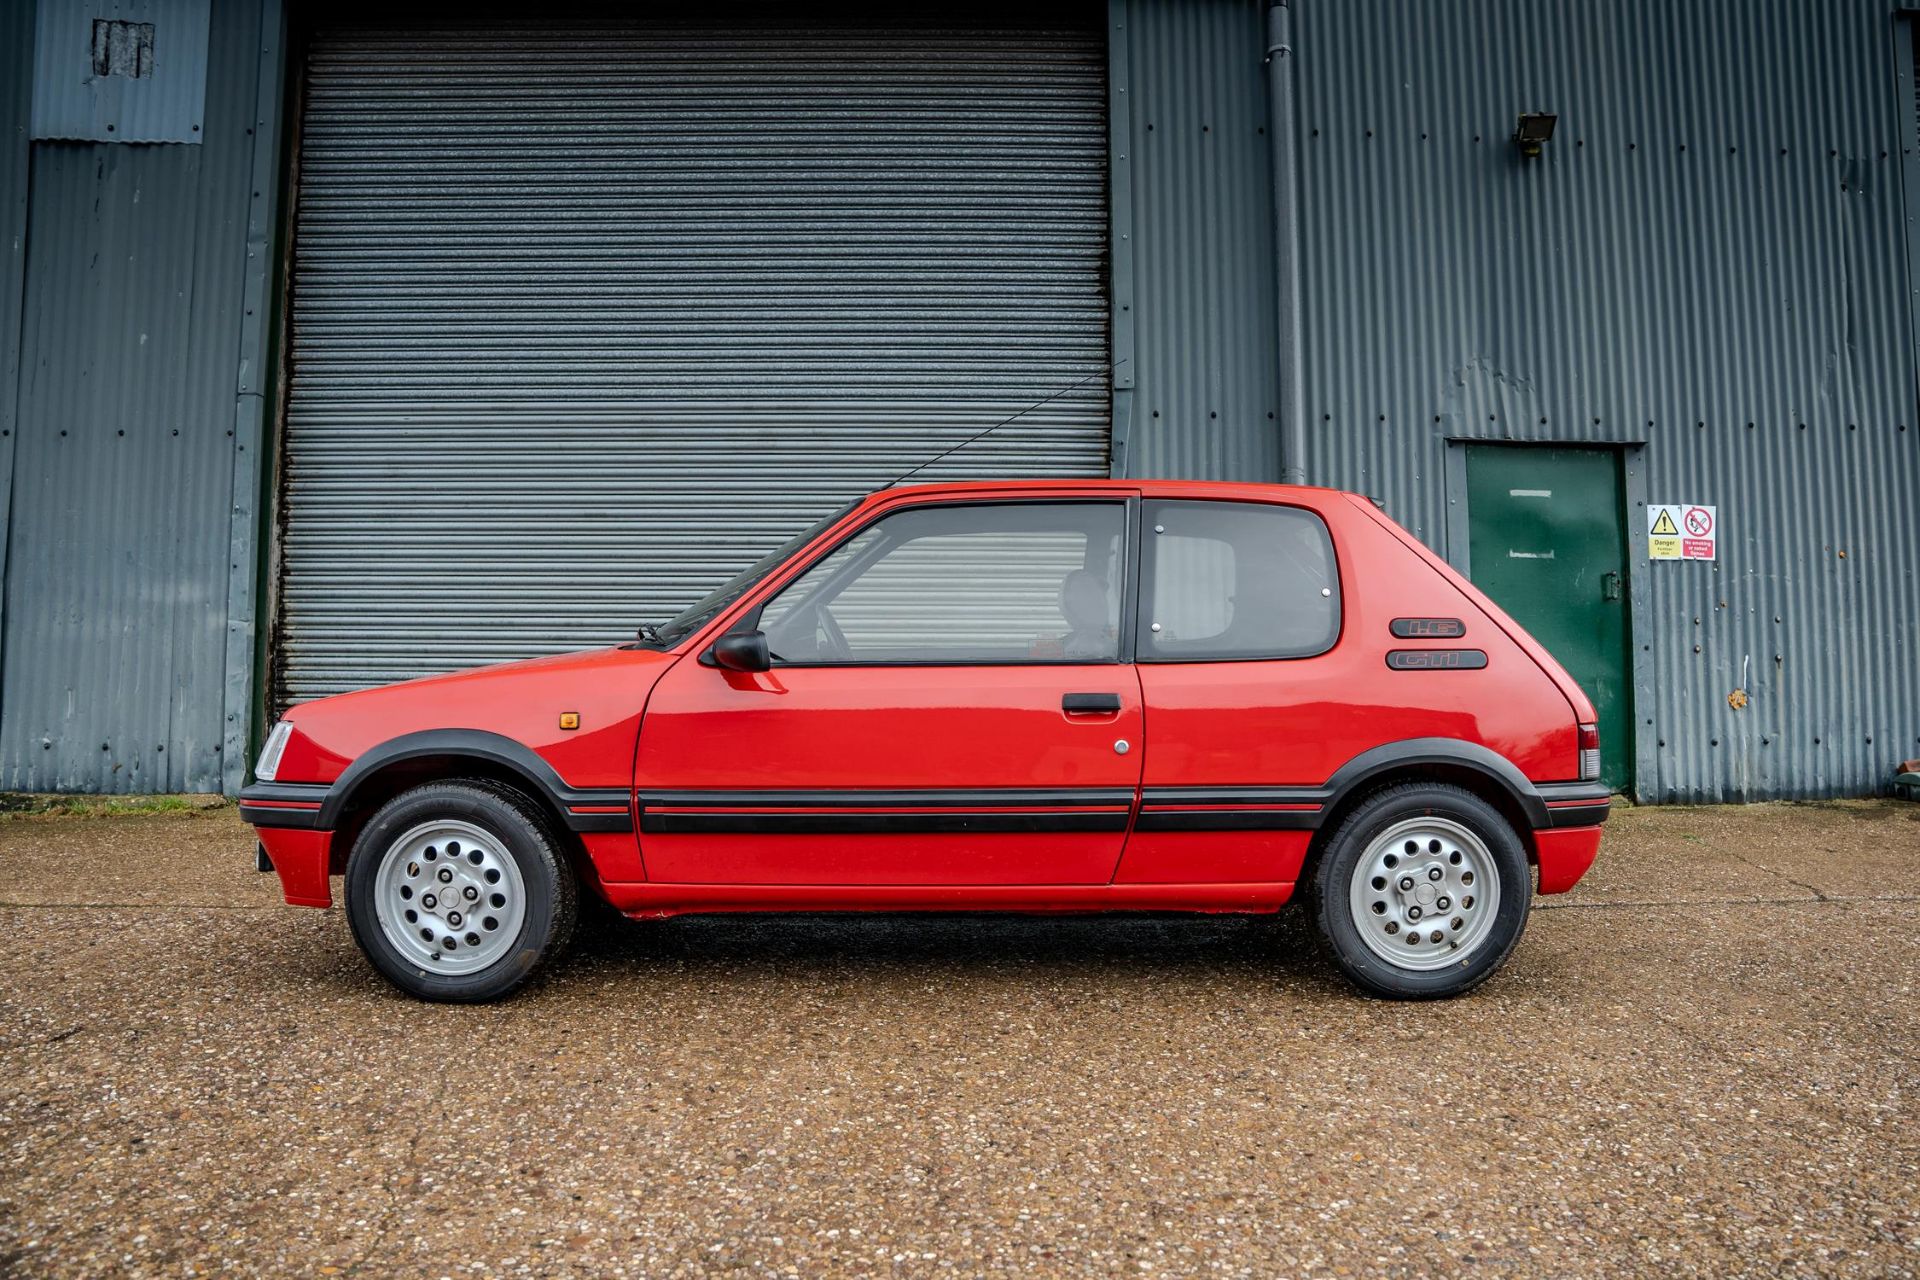 1990 Peugeot 205 GTi 1.6 (Phase 2) - Image 5 of 10